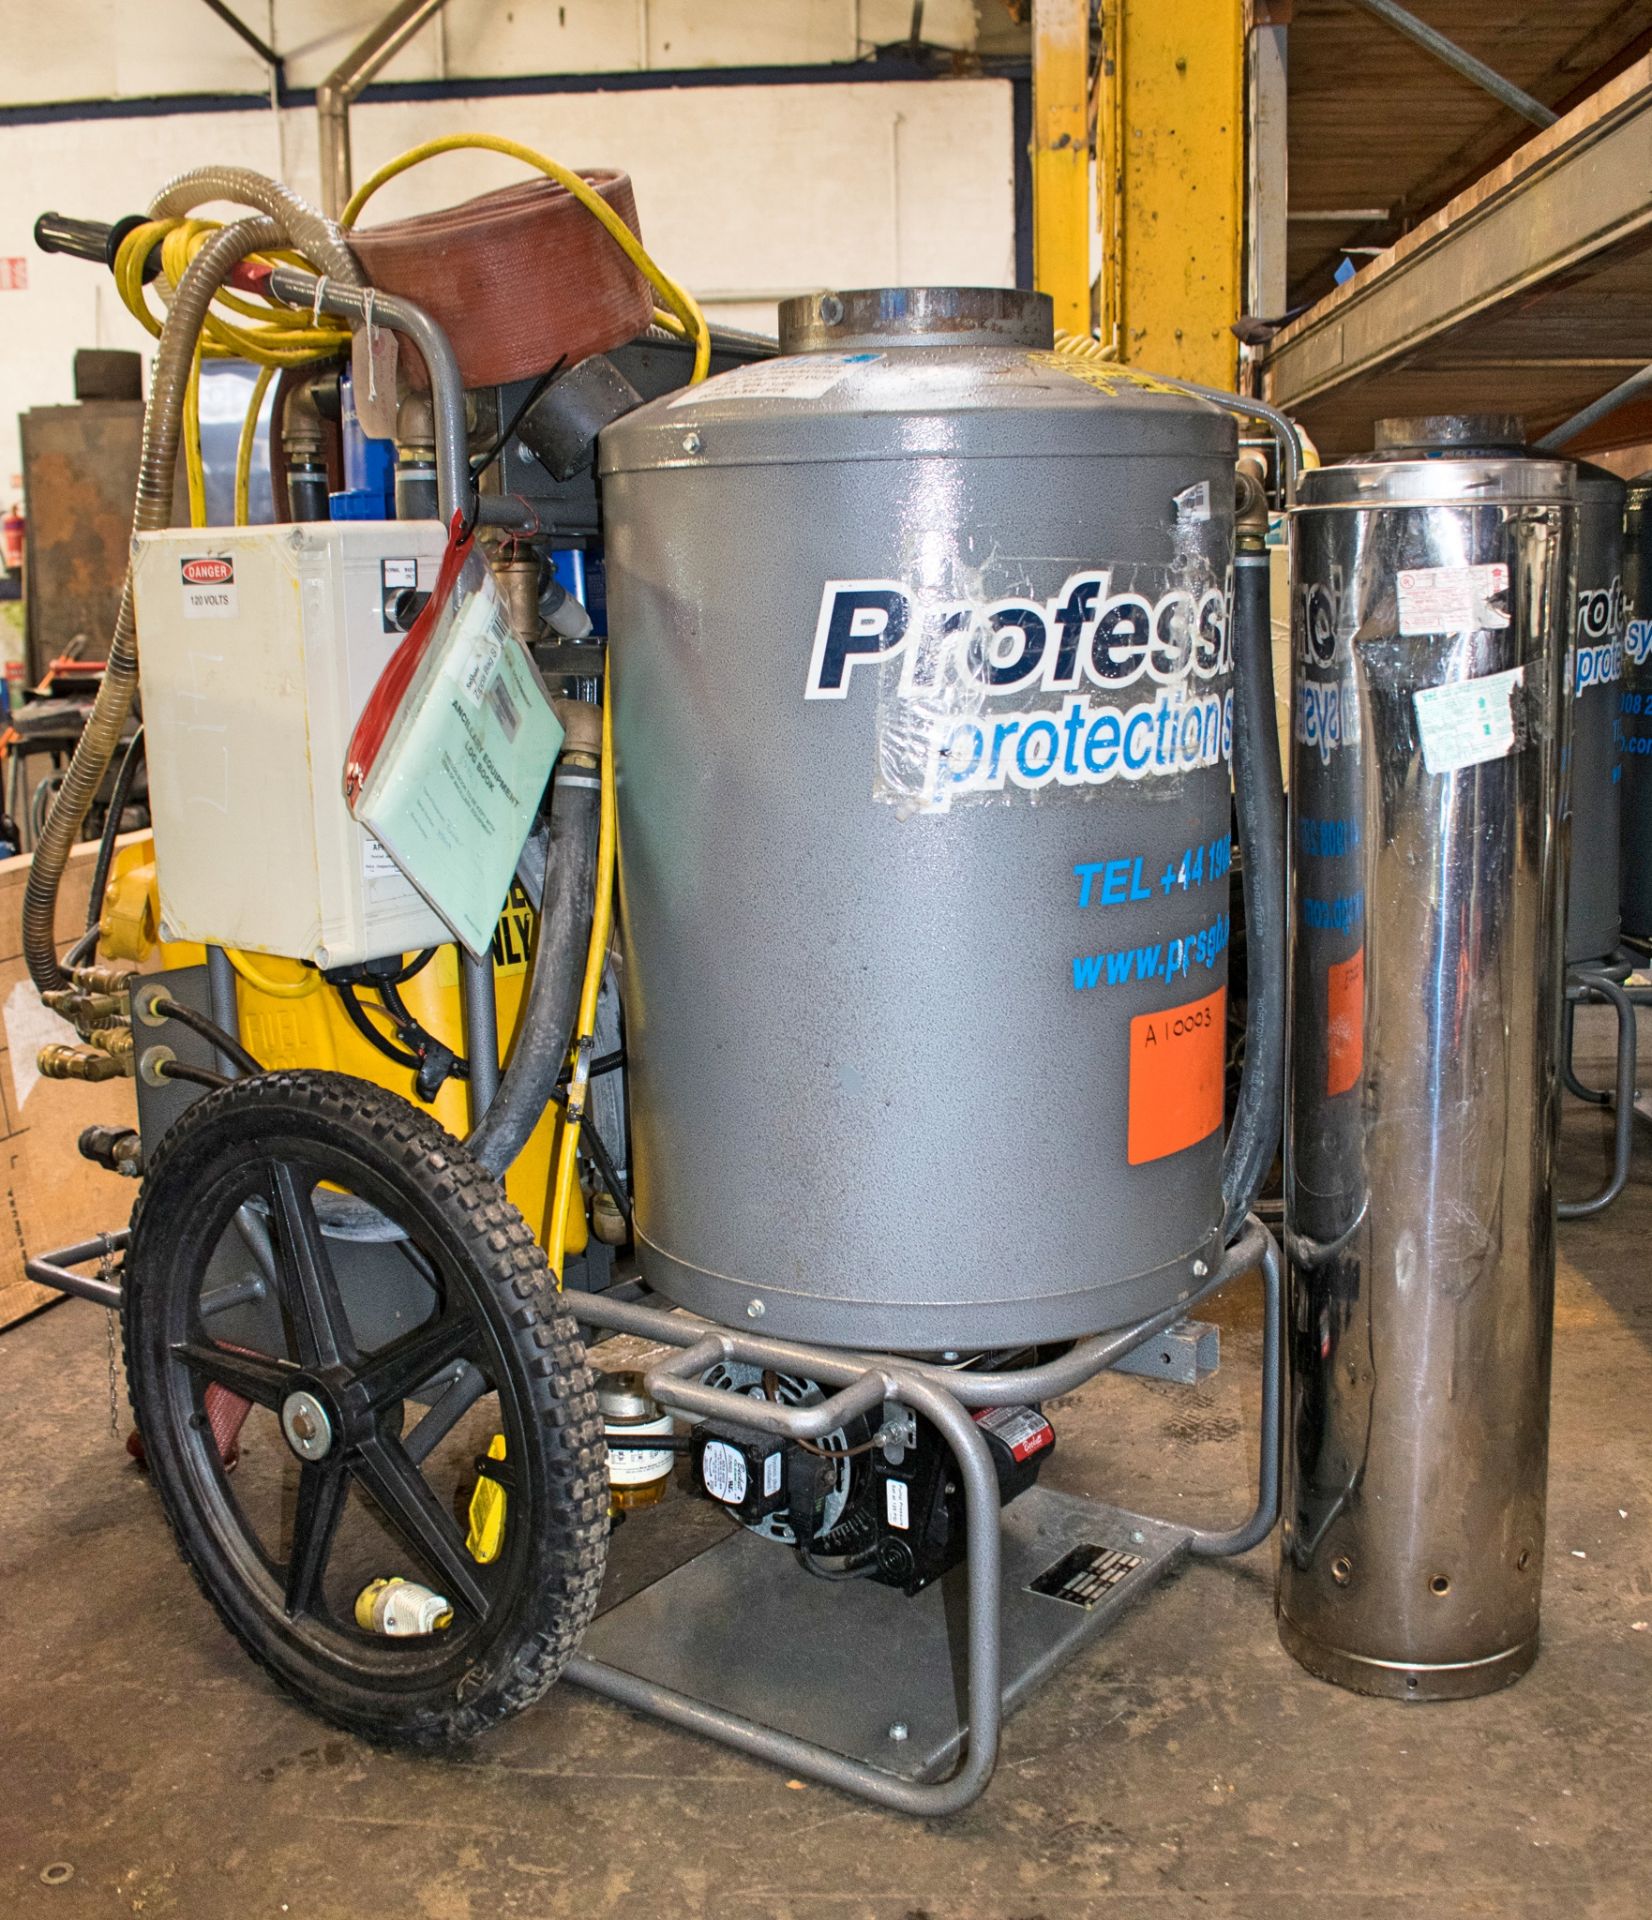 Diesel fuelled chemical decontamination personnel washer c/w flue ** Ex Fire and Rescue service**